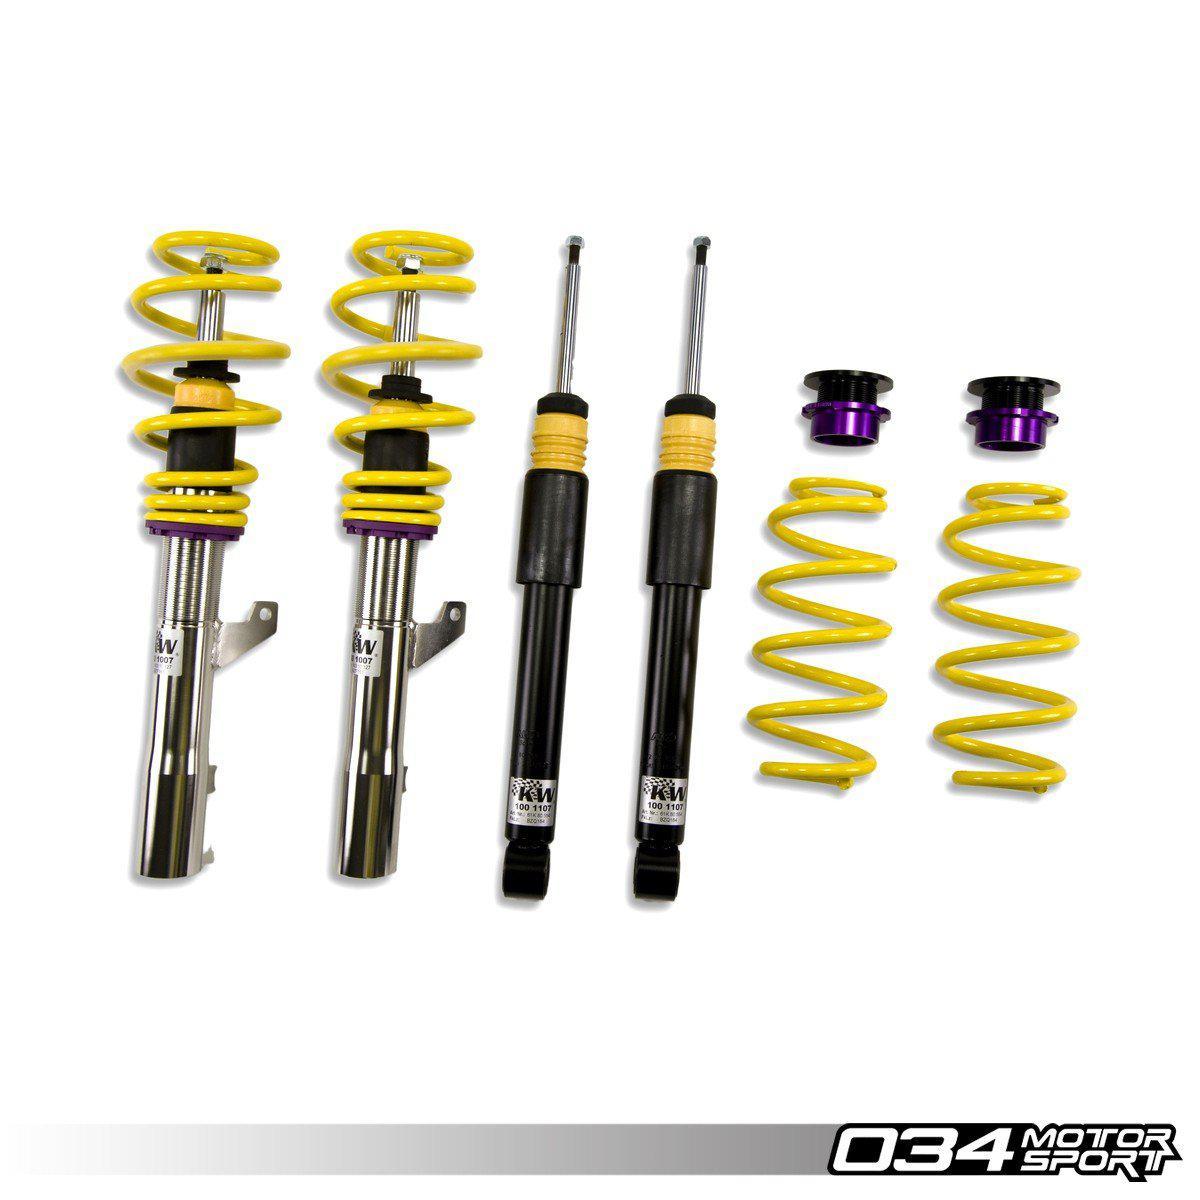 KW Variant 3 Coilover Suspension, C5 Audi A6/S6 Quattro-A Little Tuning Co